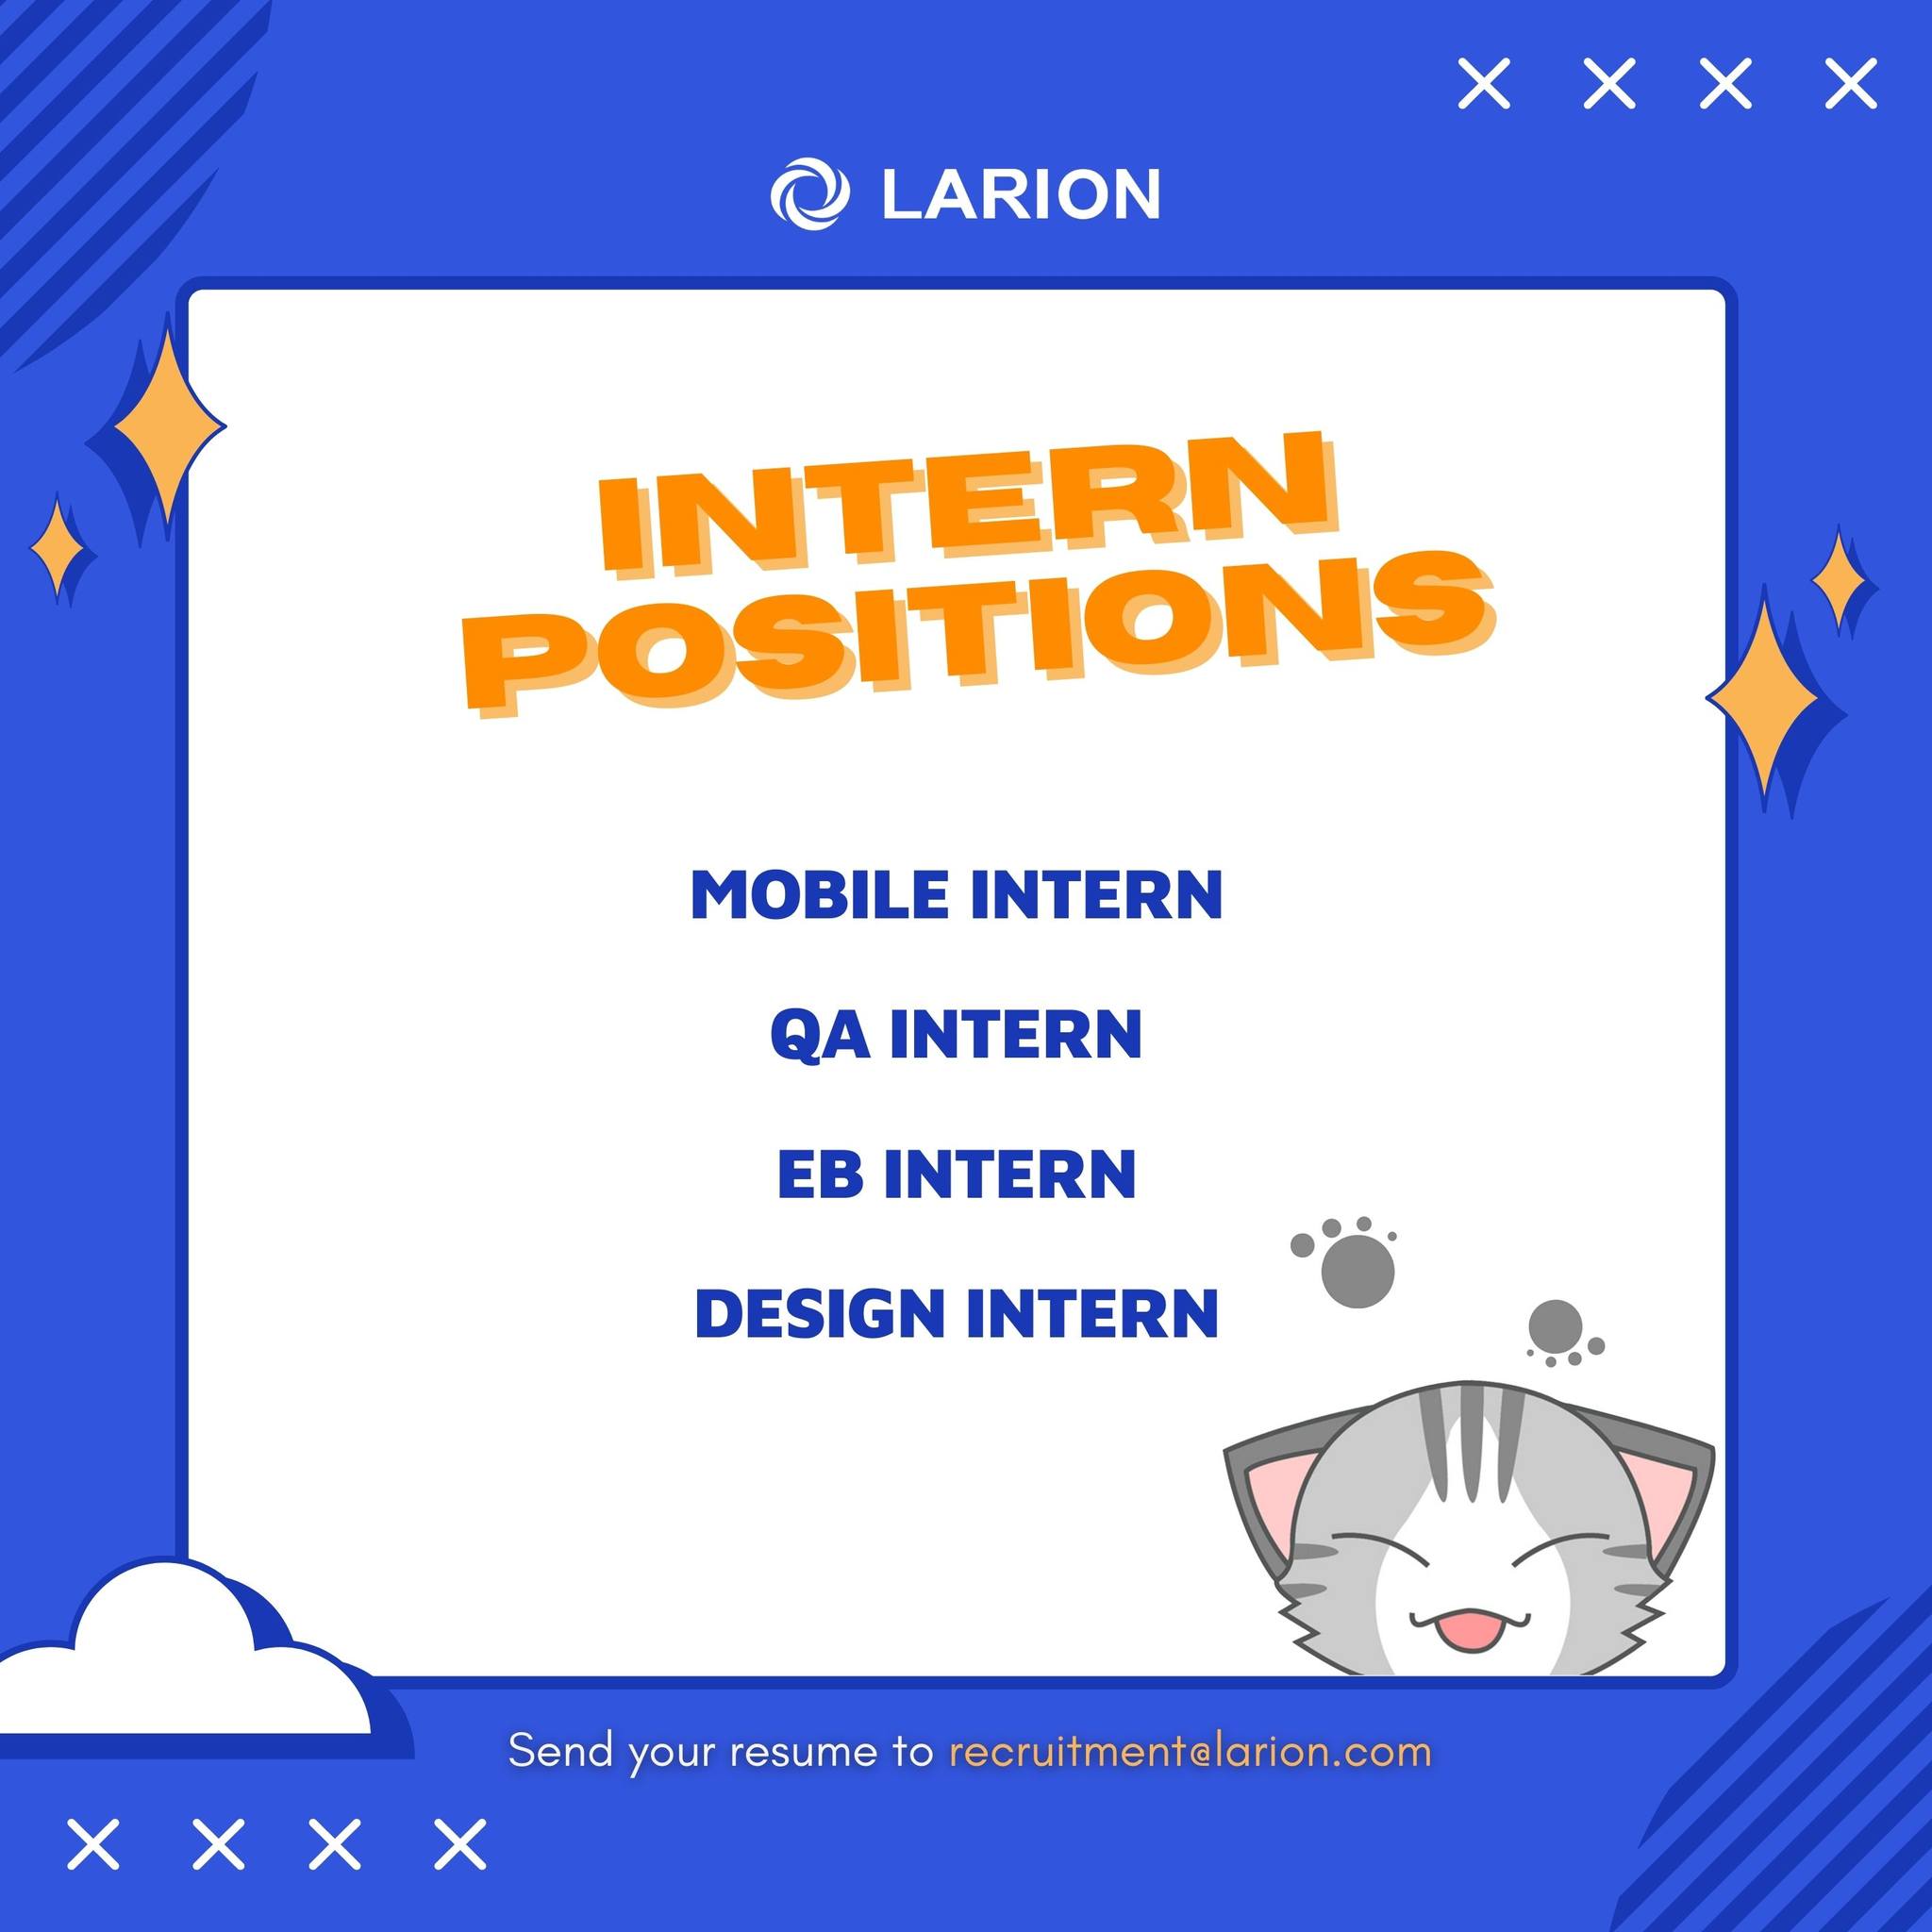 Larion is hiring Intern positions